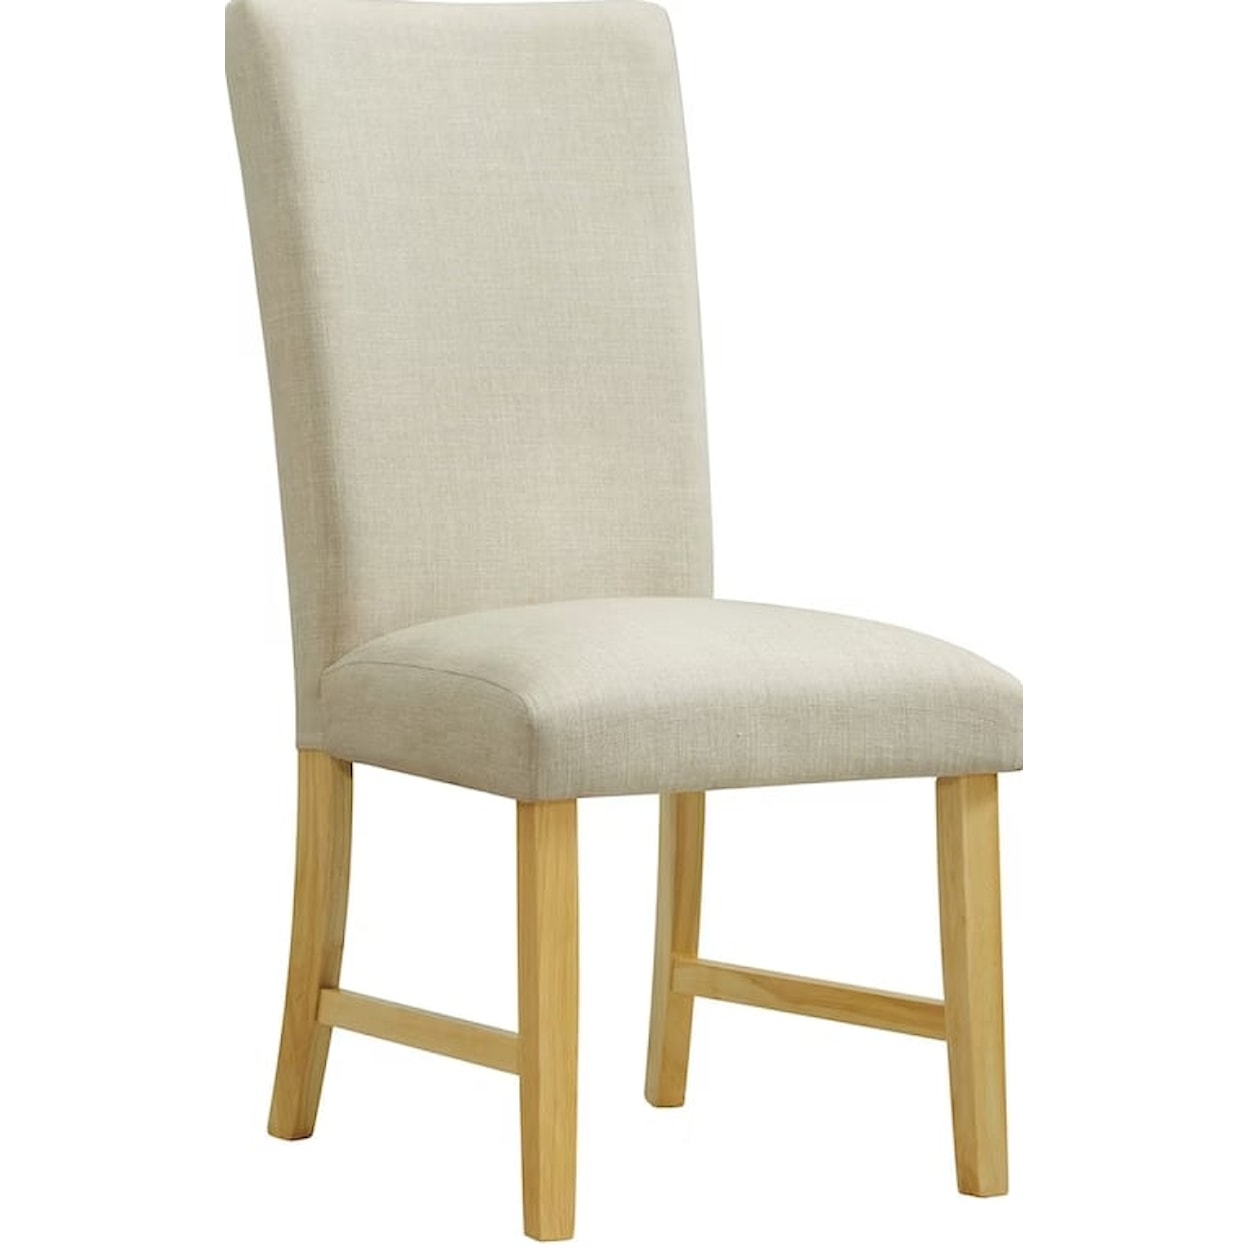 Elements Morris Side Dining Chairs